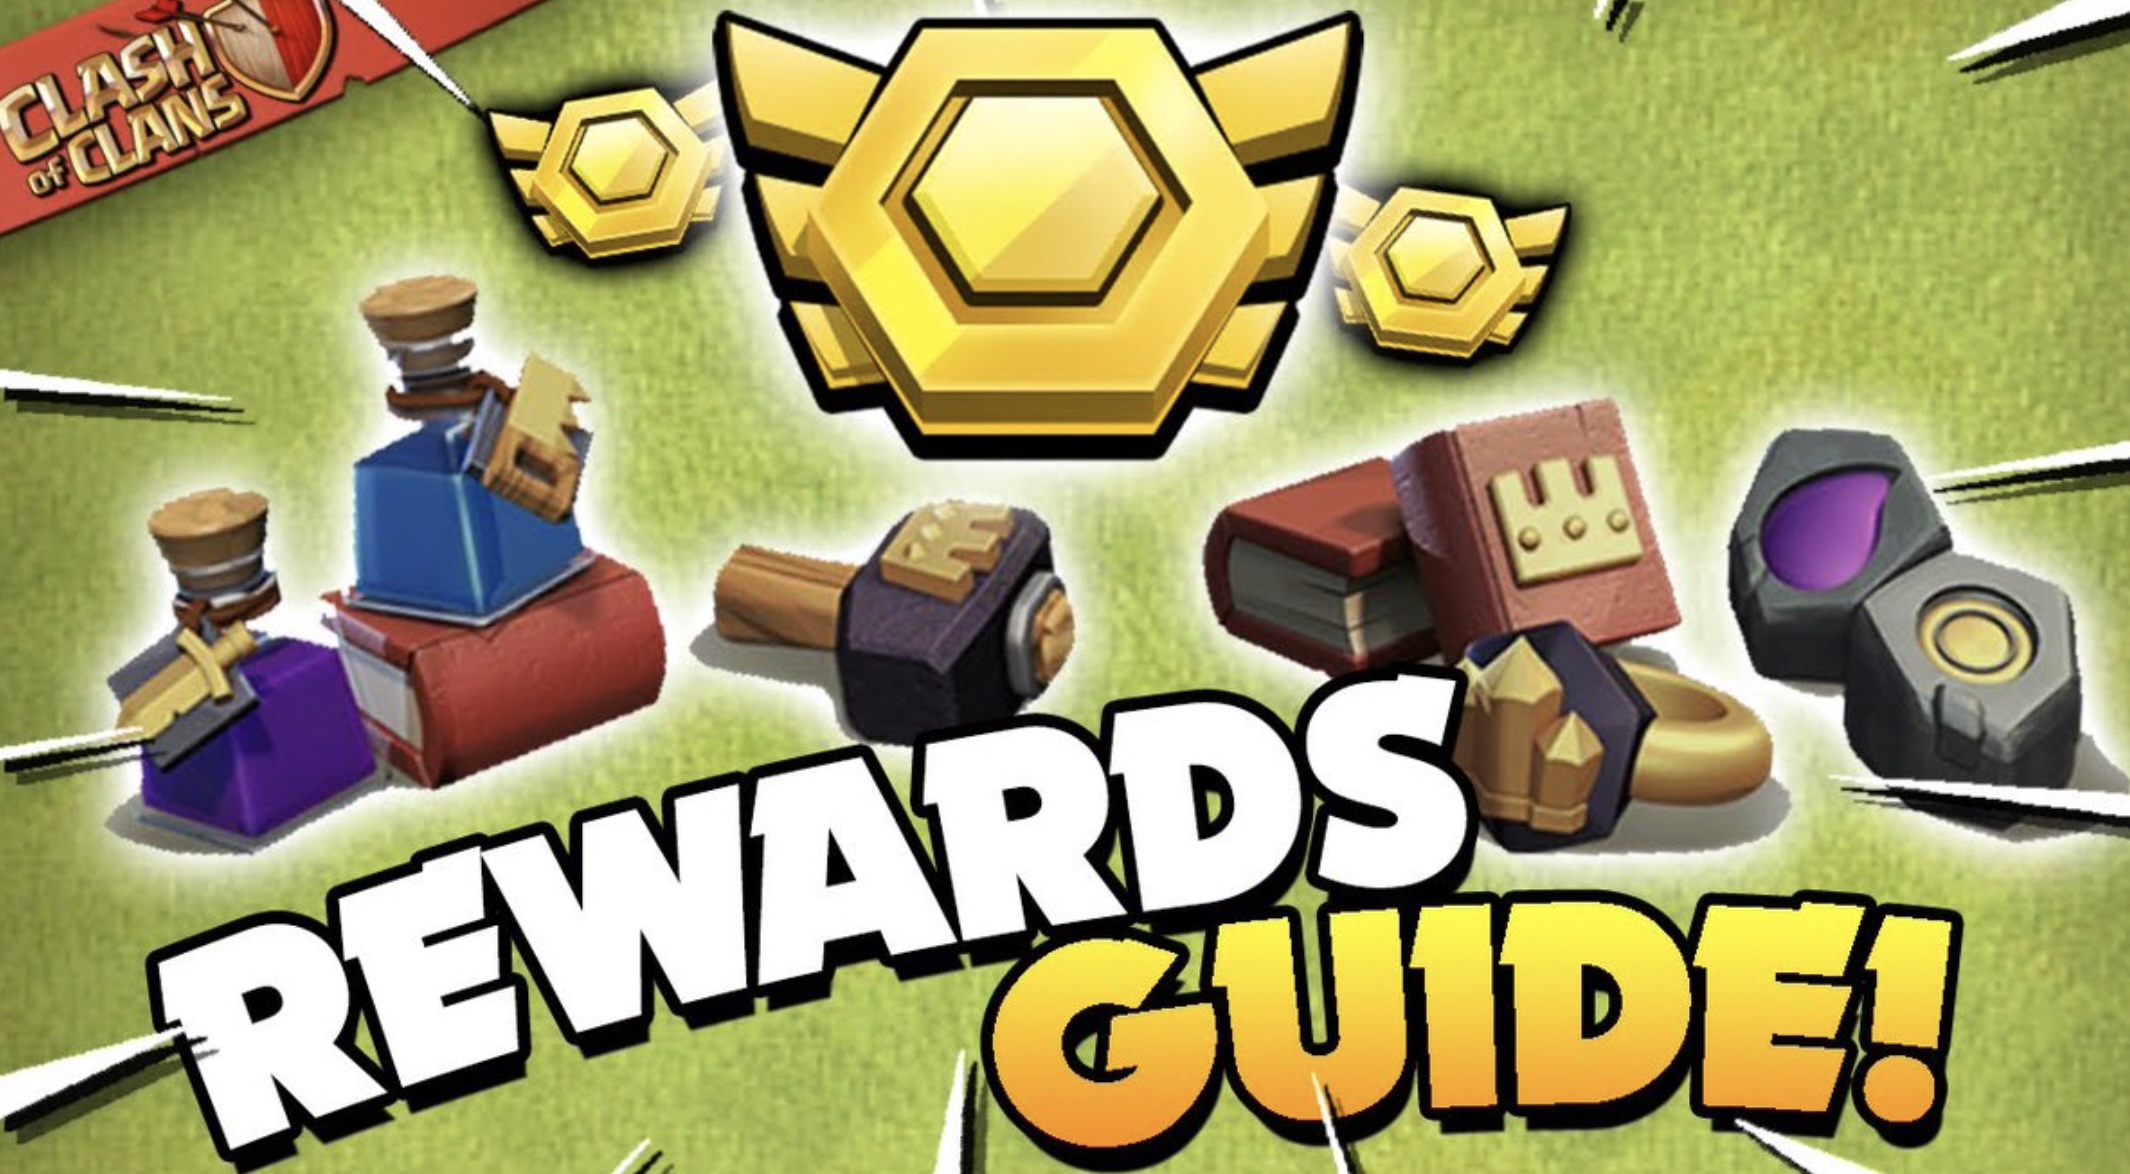 How To Get League Medals In Clash Of Clans